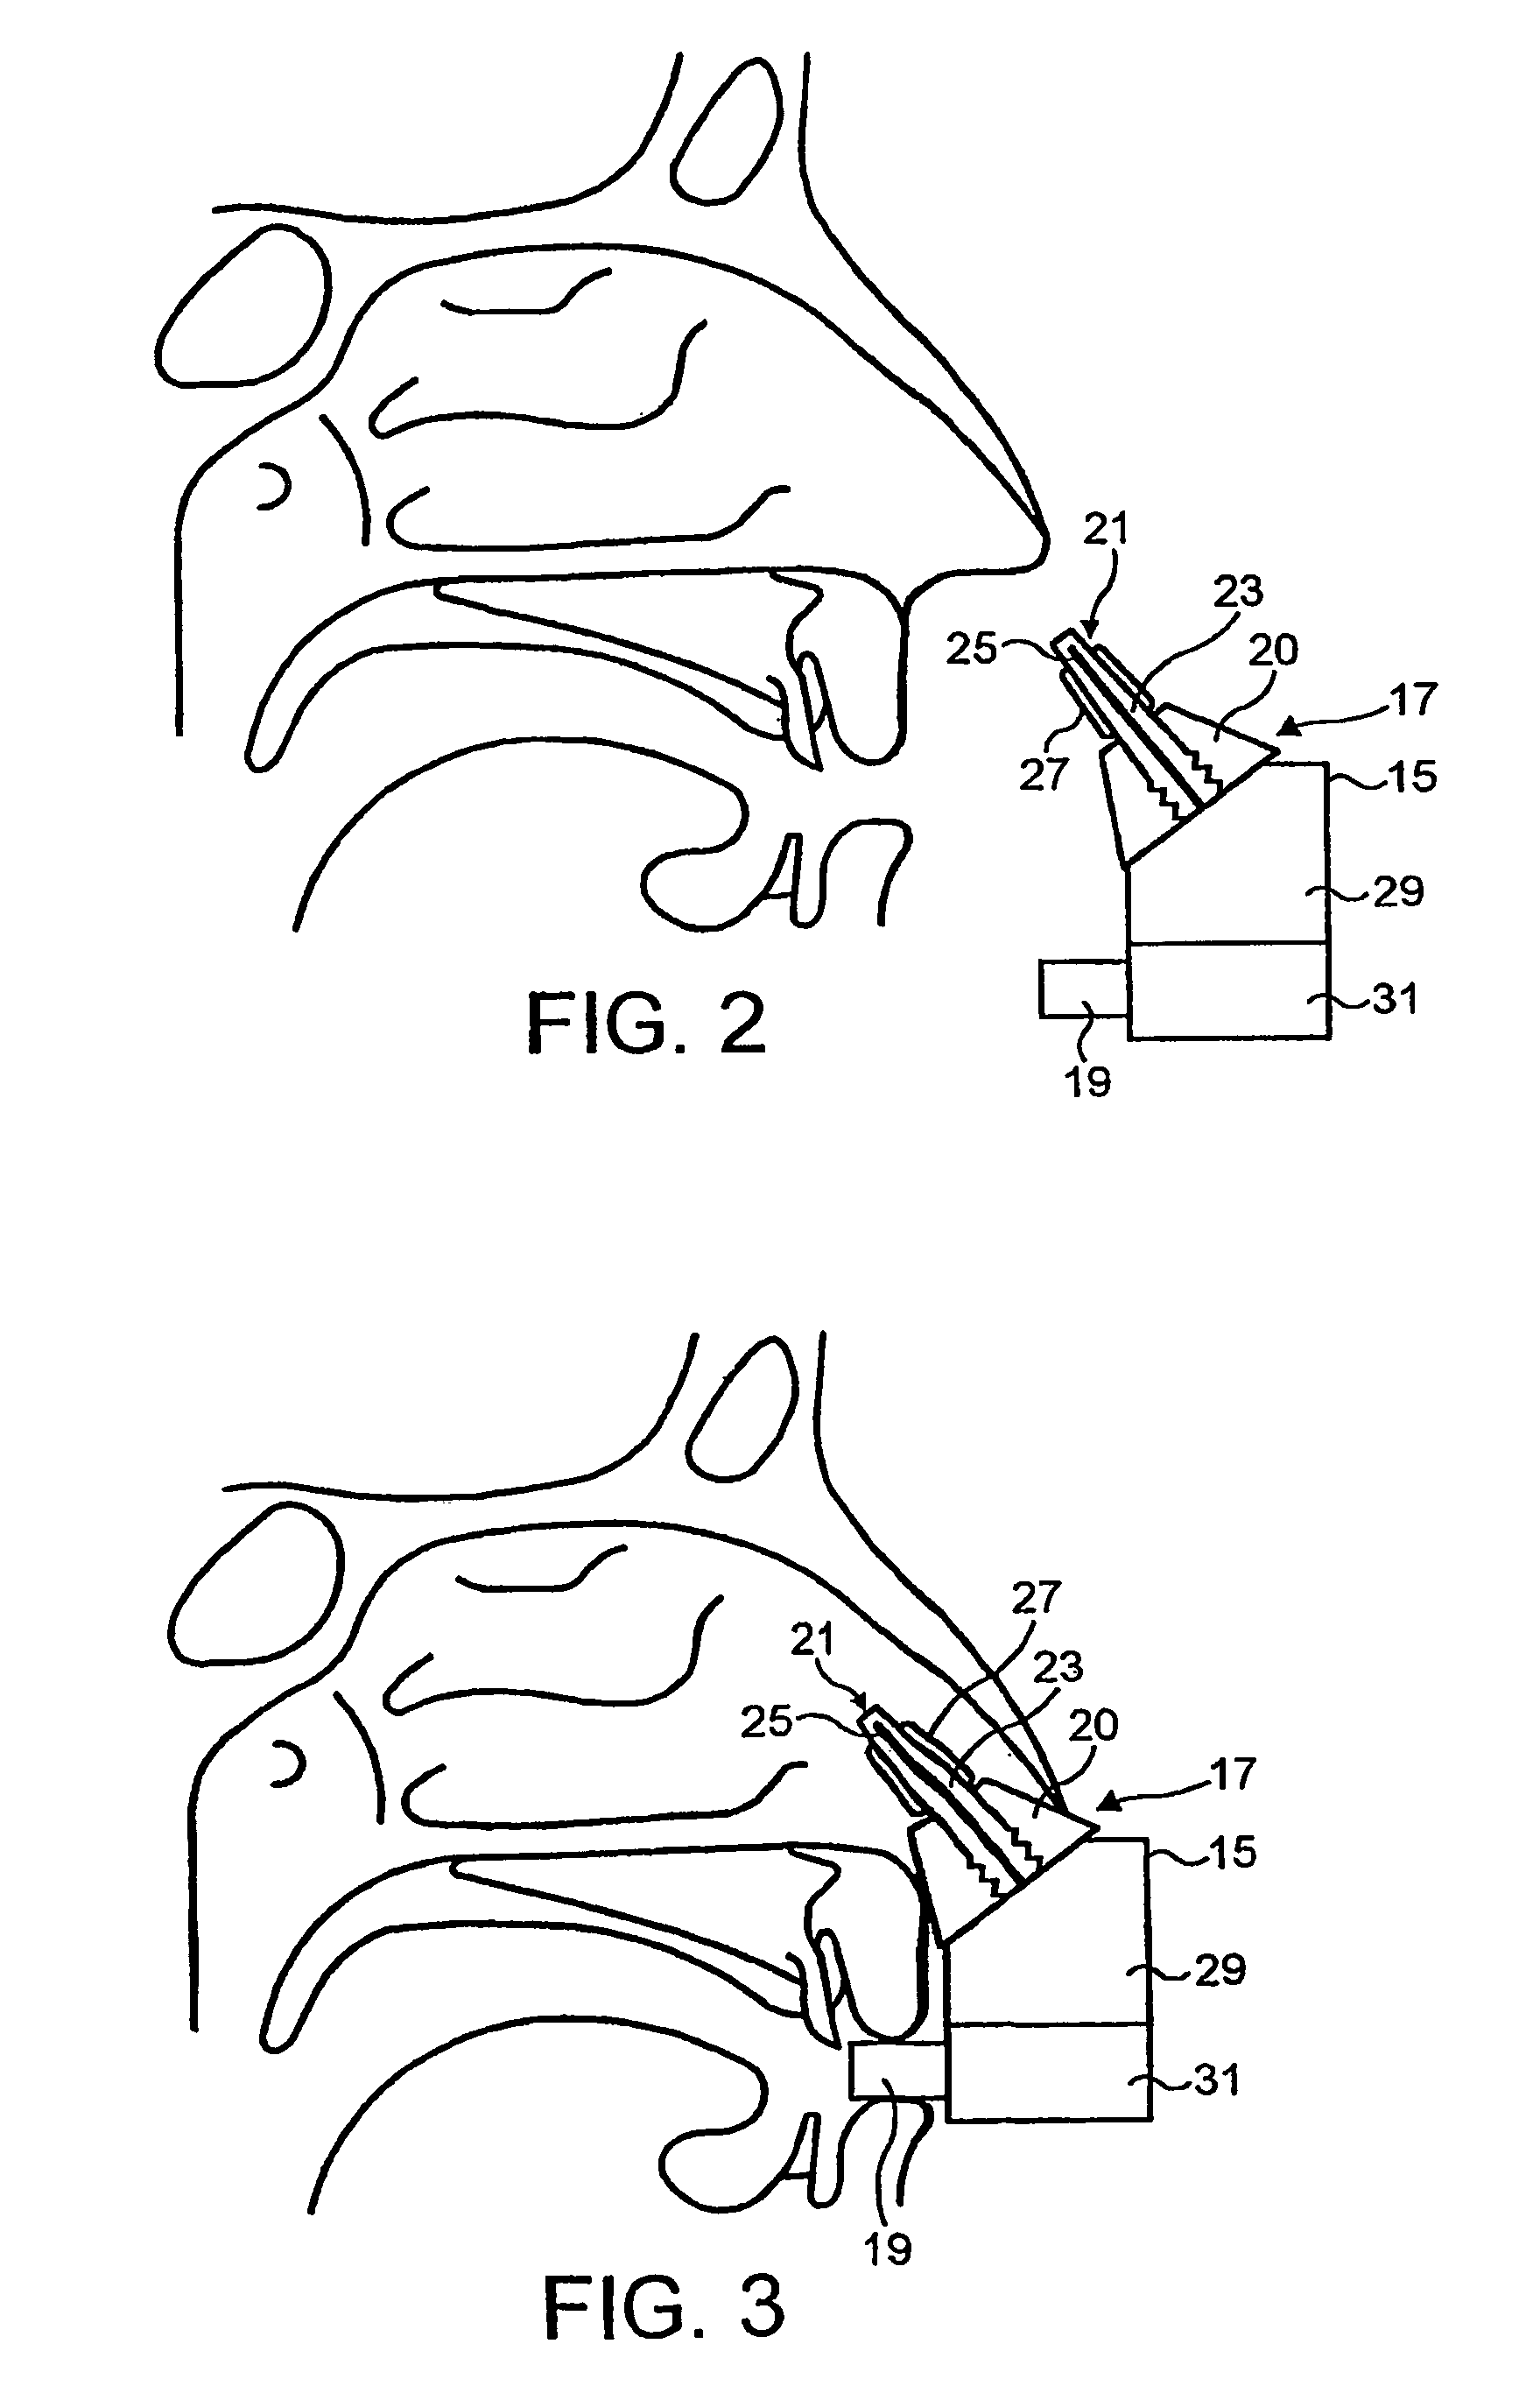 Nasal devices